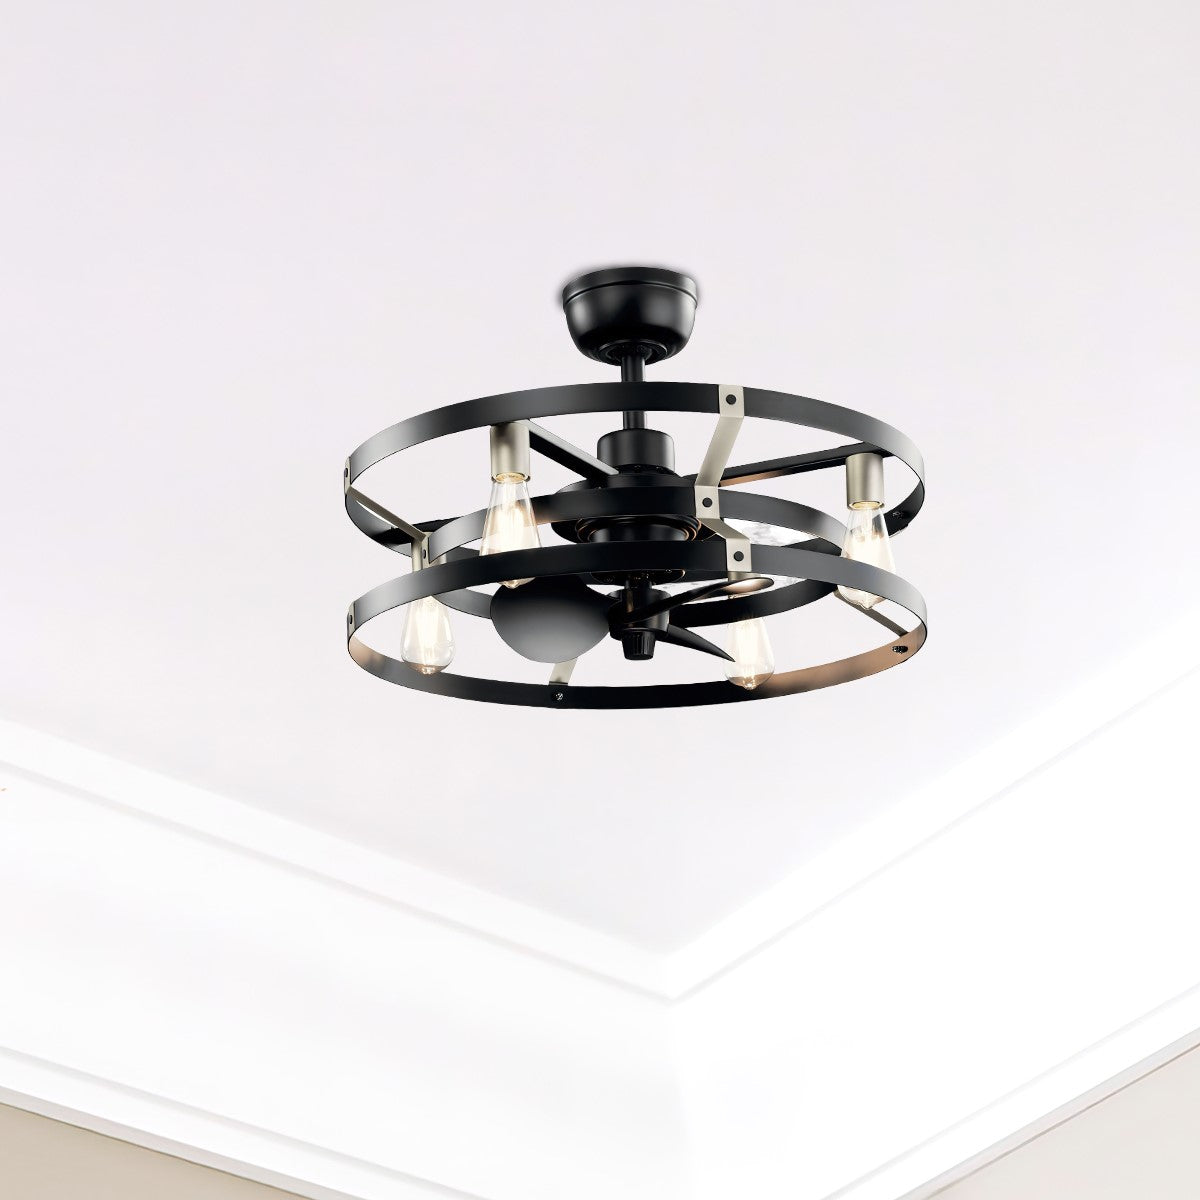 Cavelli 25 Inch Modern Chandelier Ceiling Fan With Light, Wall Control Included